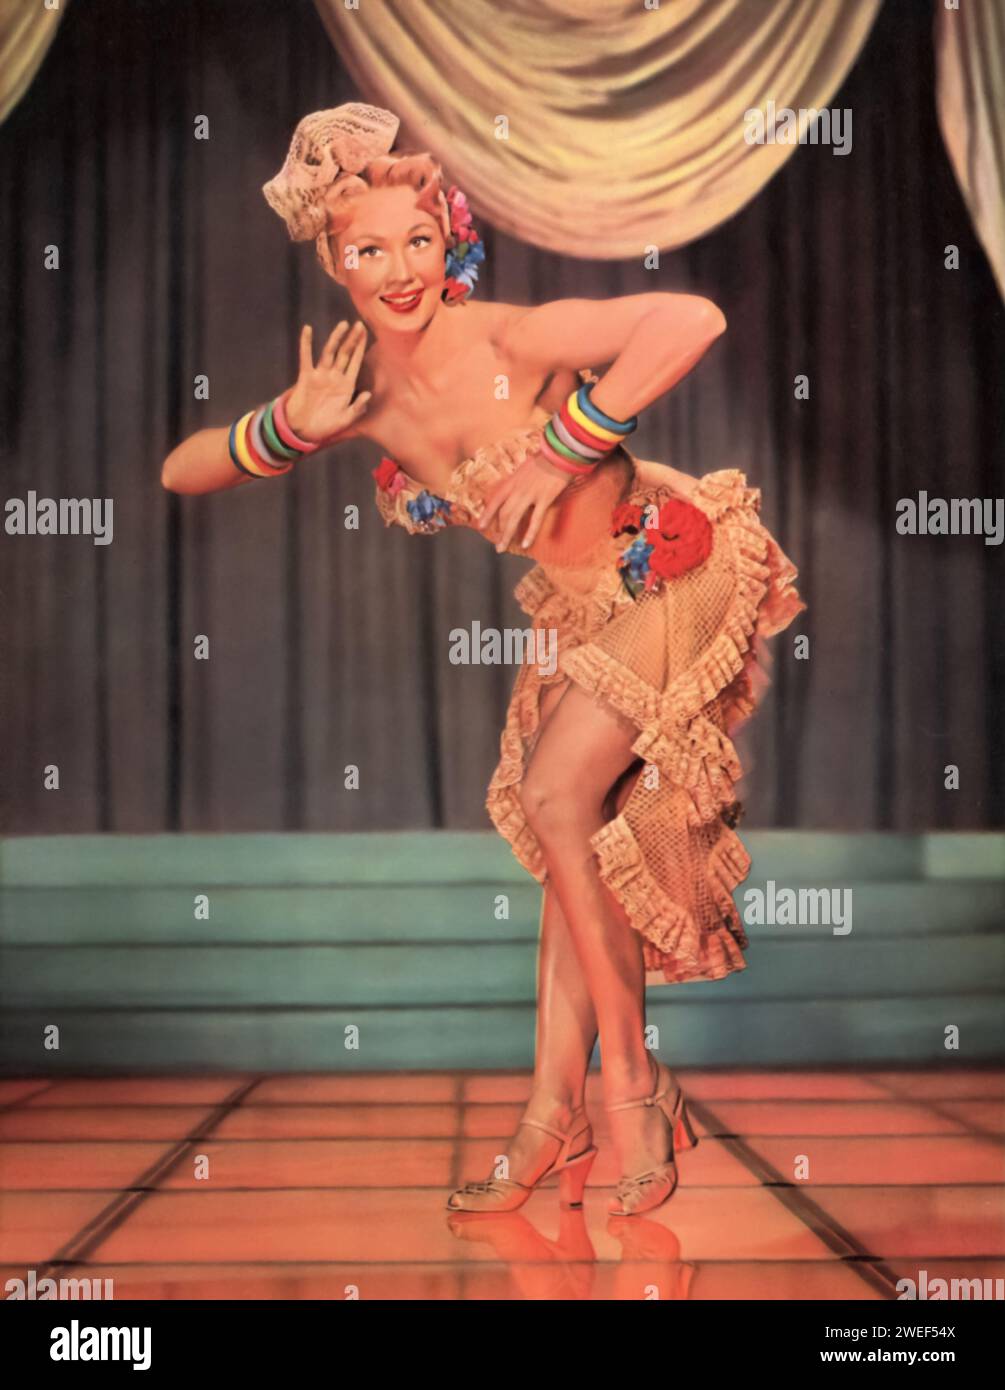 Virginia Mayo stars in 'Painting the Clouds with Sunshine' (1951), a musical film filled with vibrant performances and catchy tunes. In this movie, Mayo plays Carol, a member of a singing trio trying to strike it rich in Las Vegas. Stock Photo